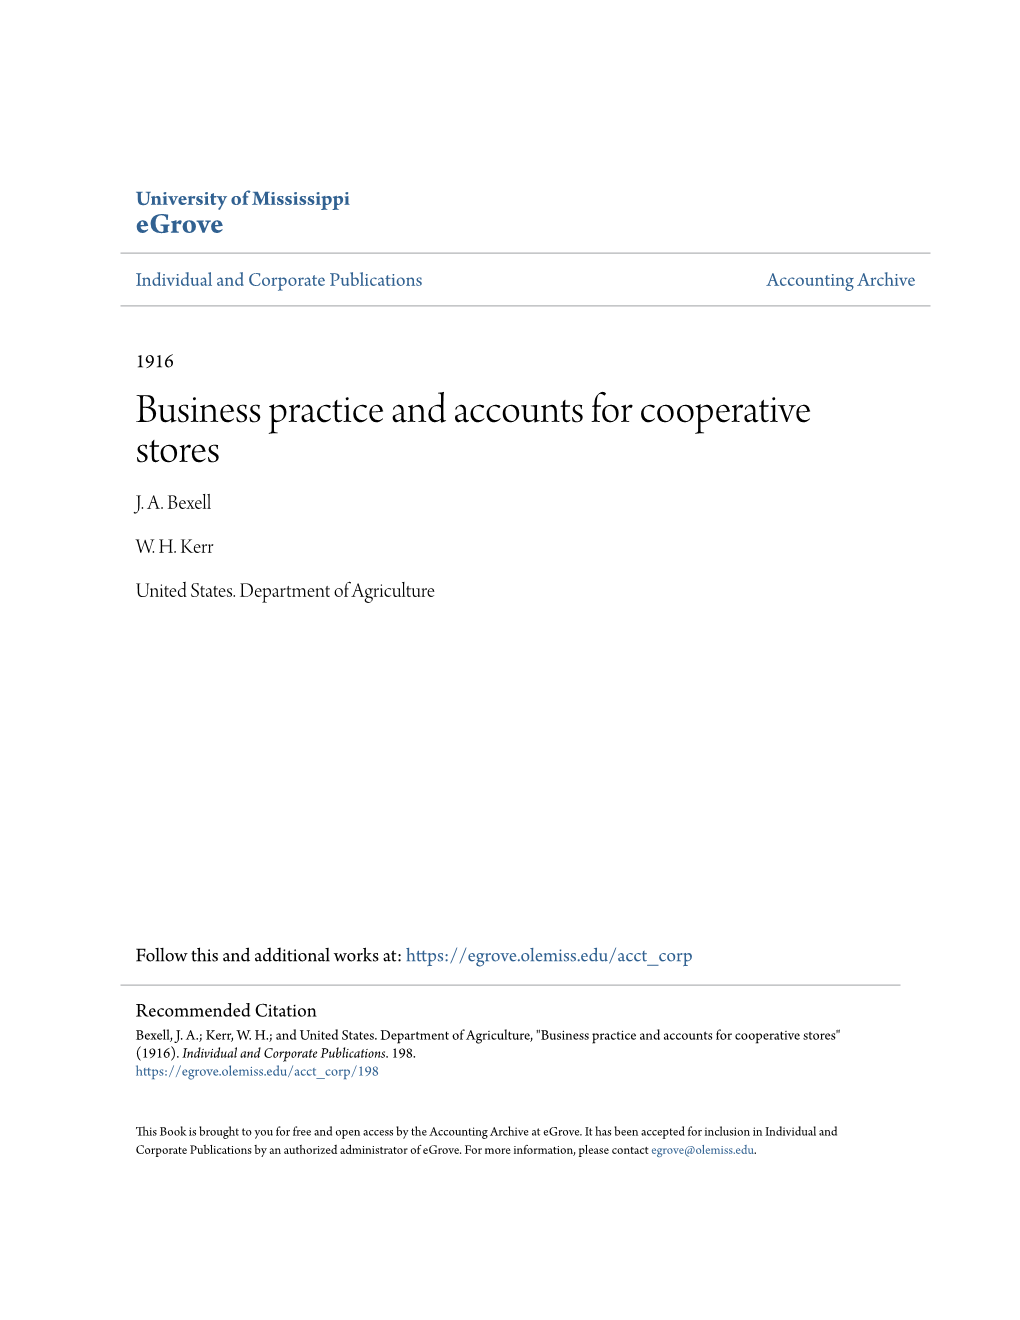 Business Practice and Accounts for Cooperative Stores J